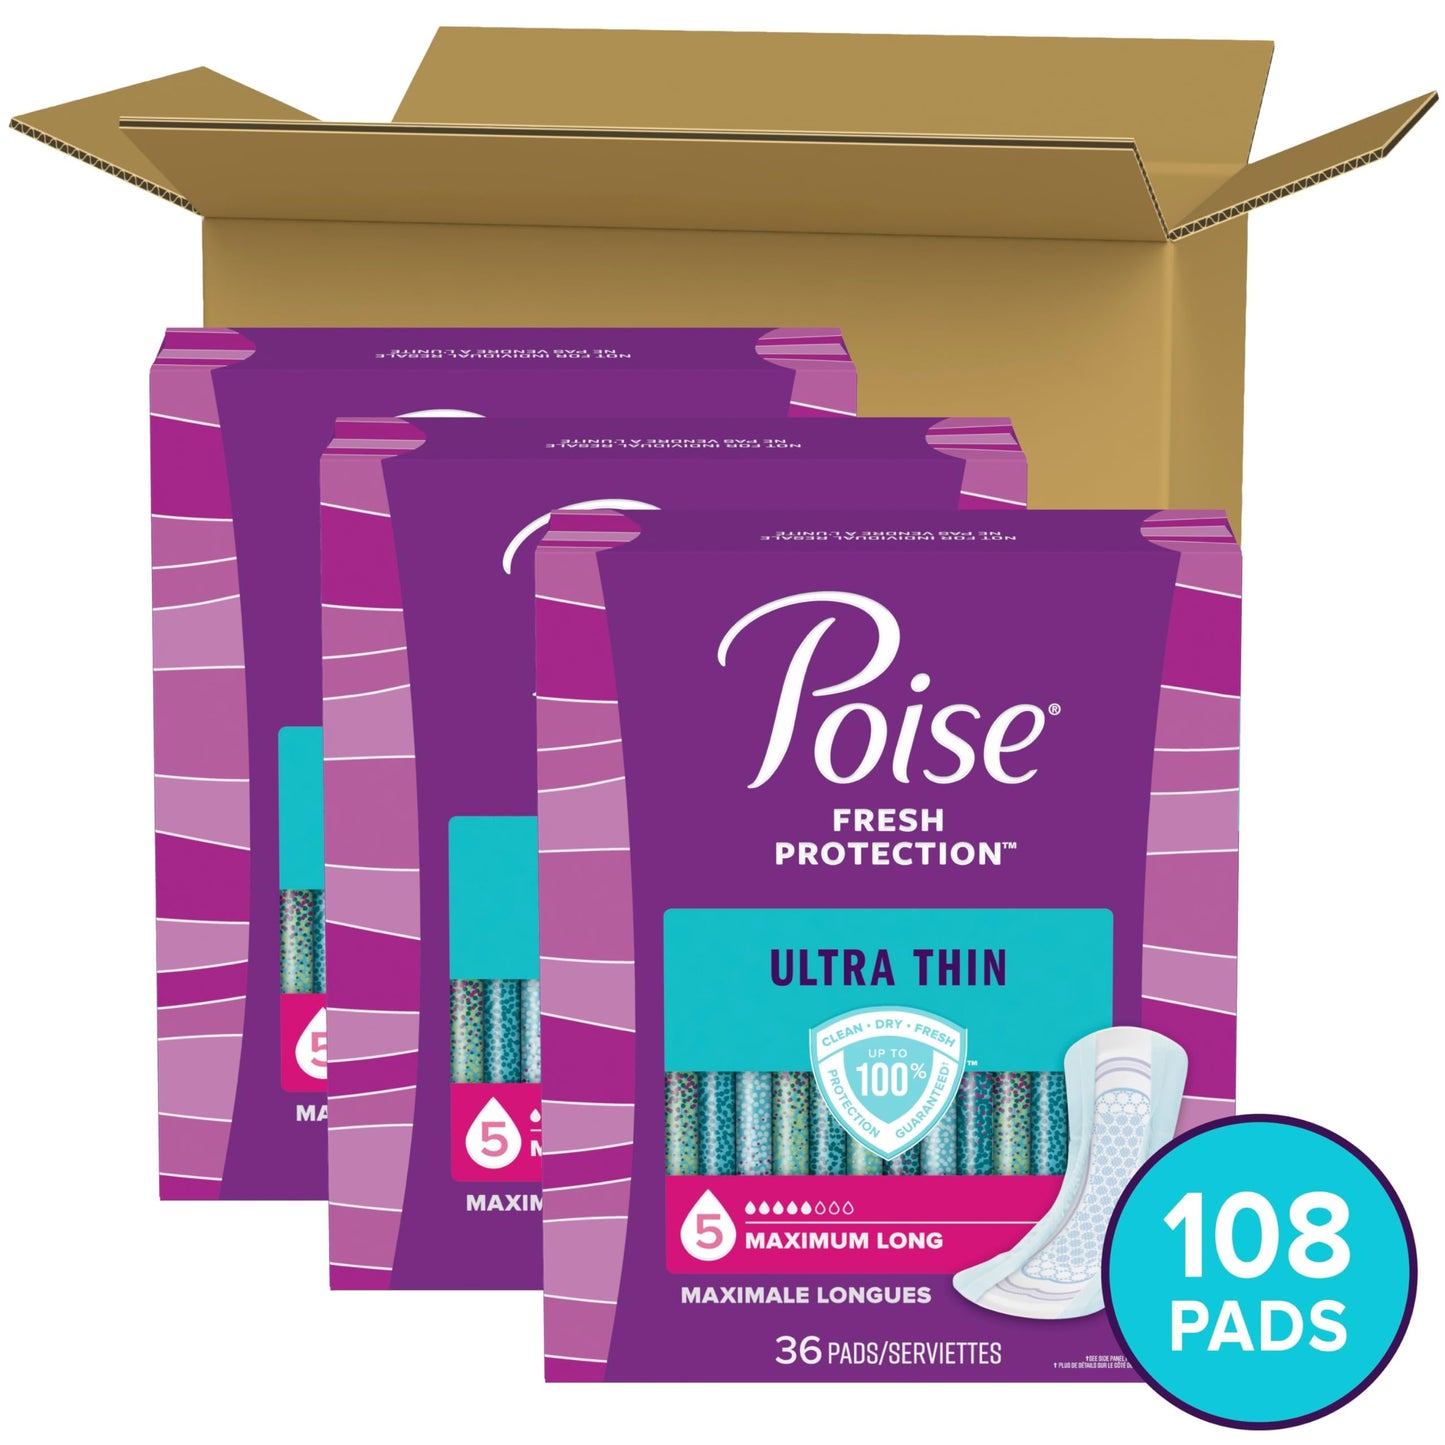 Poise Ultra Thin Incontinence Pads & Postpartum Incontinence Pads, 5 Drop Maximum Absorbency, Long Length, 36 Count (Pack of 3), Packaging May Vary